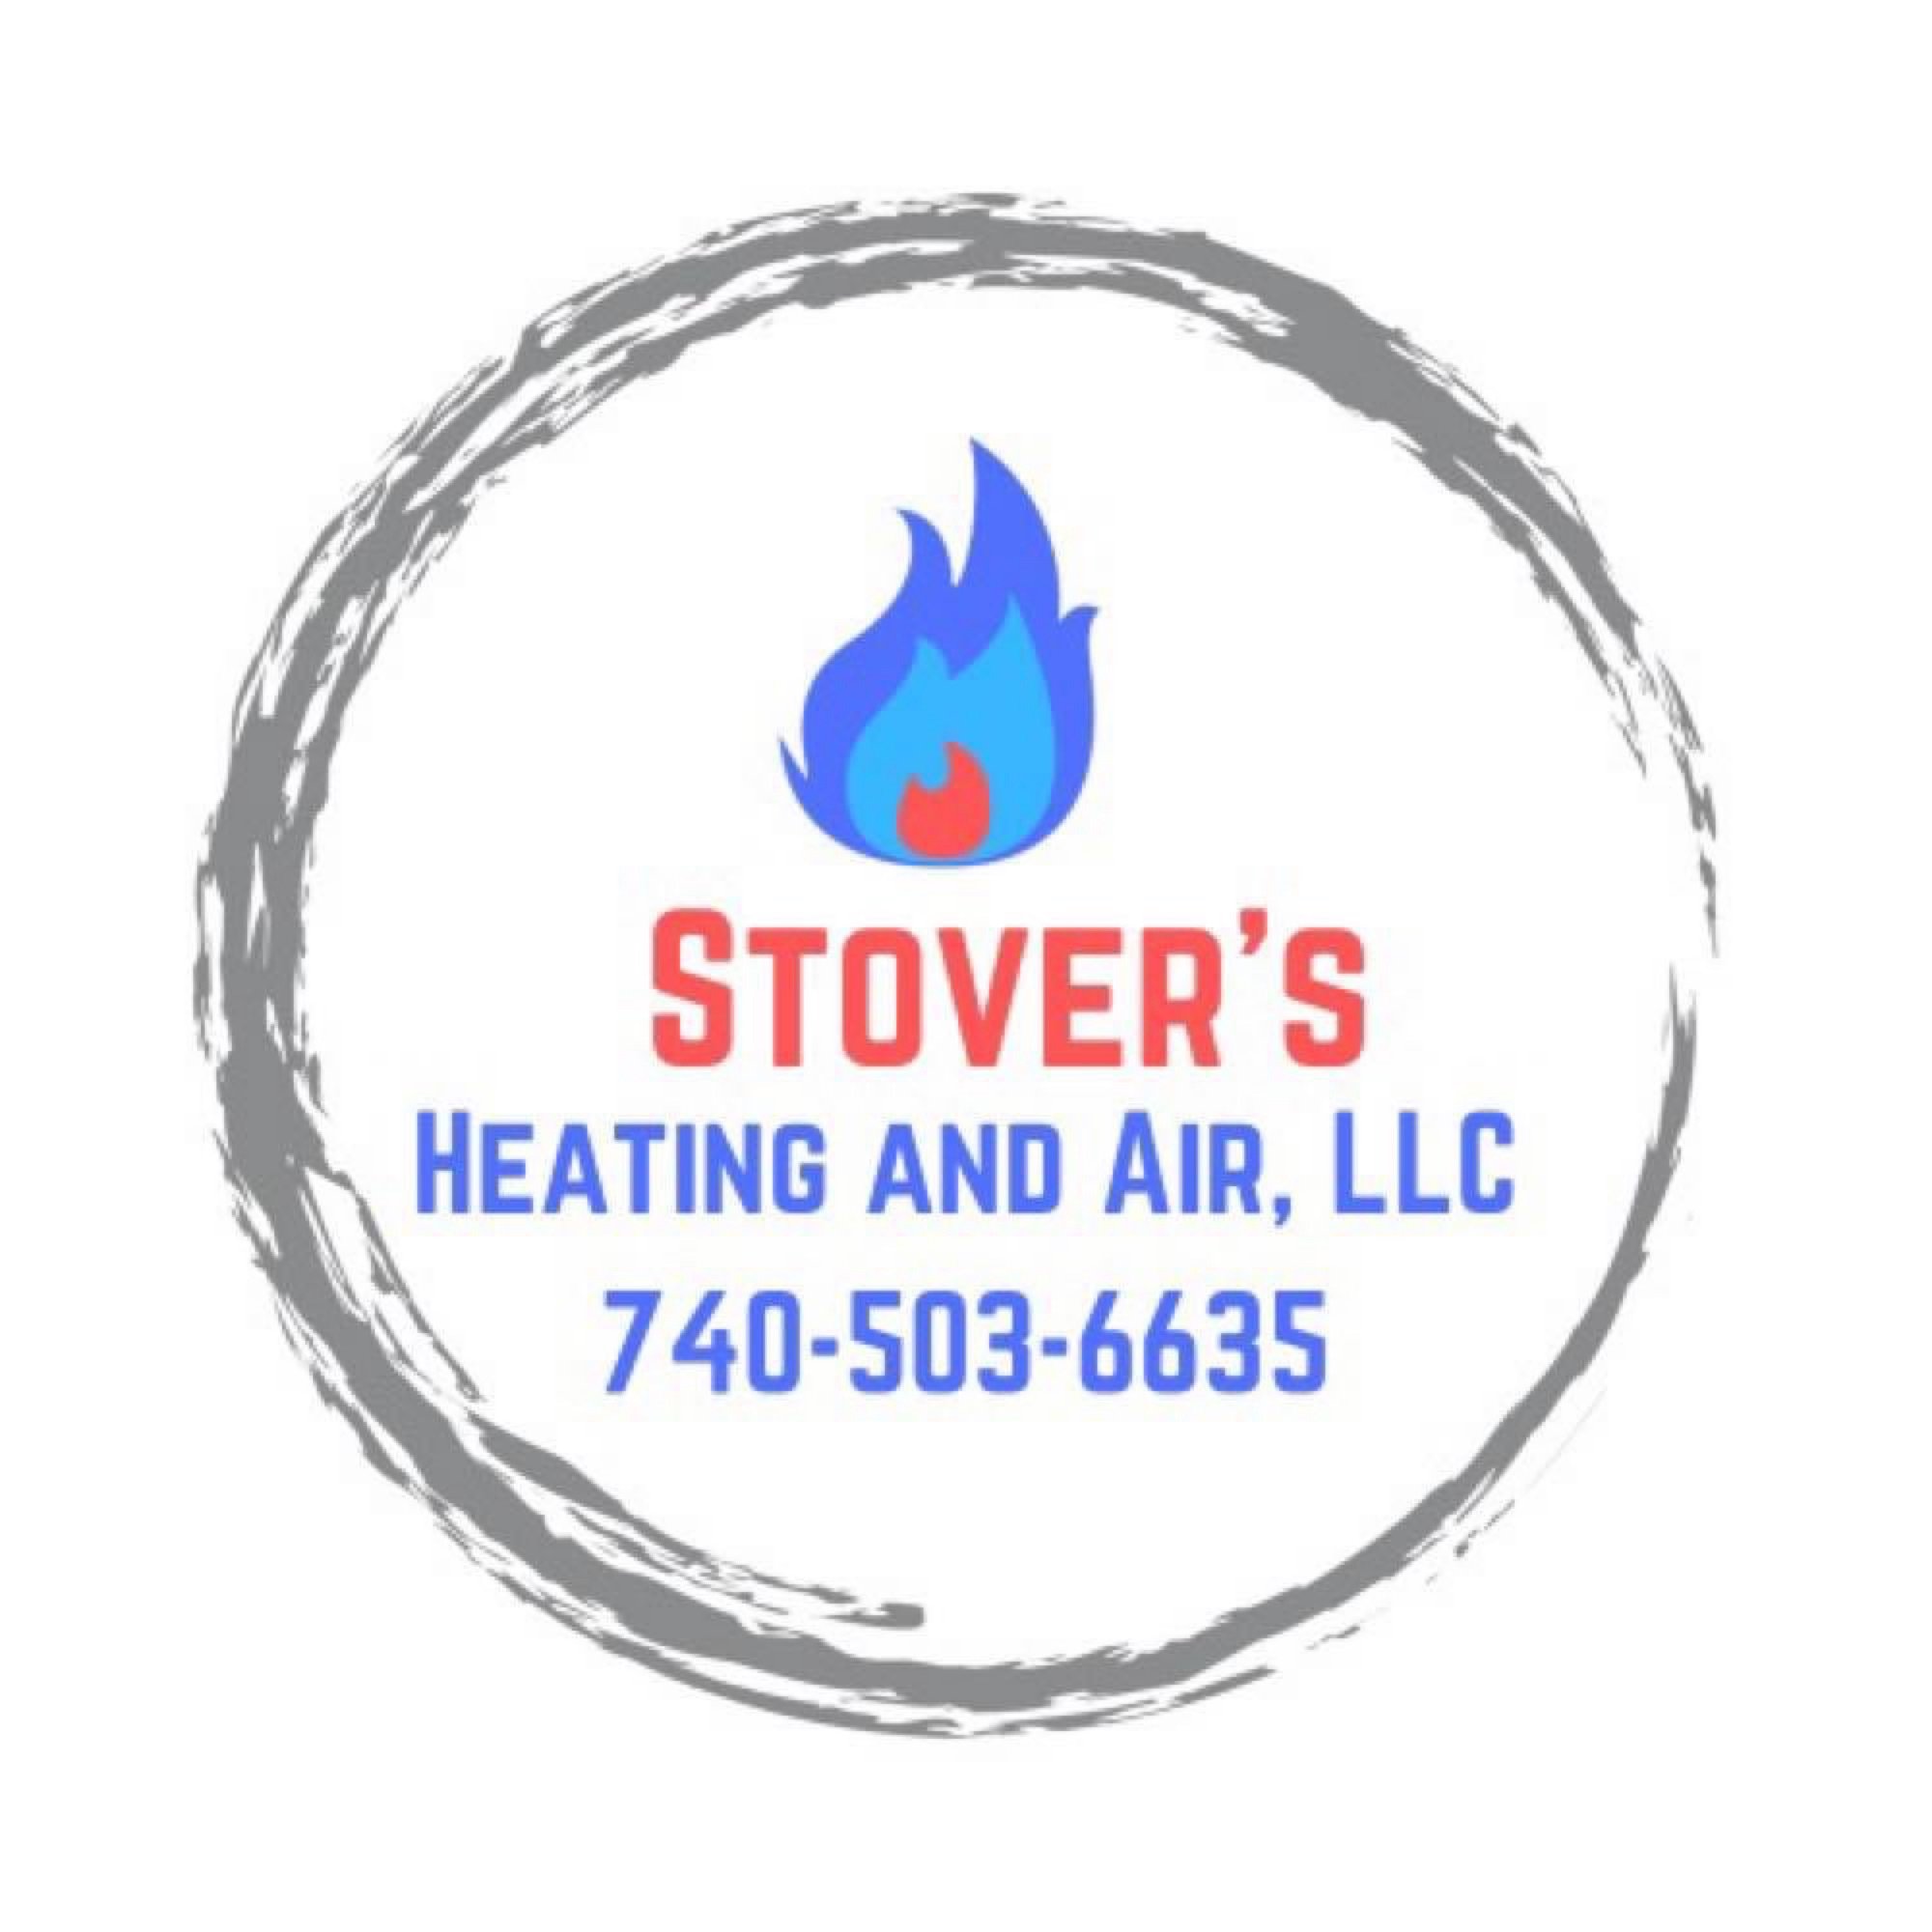 Stovers Heating and Air, LLC Logo